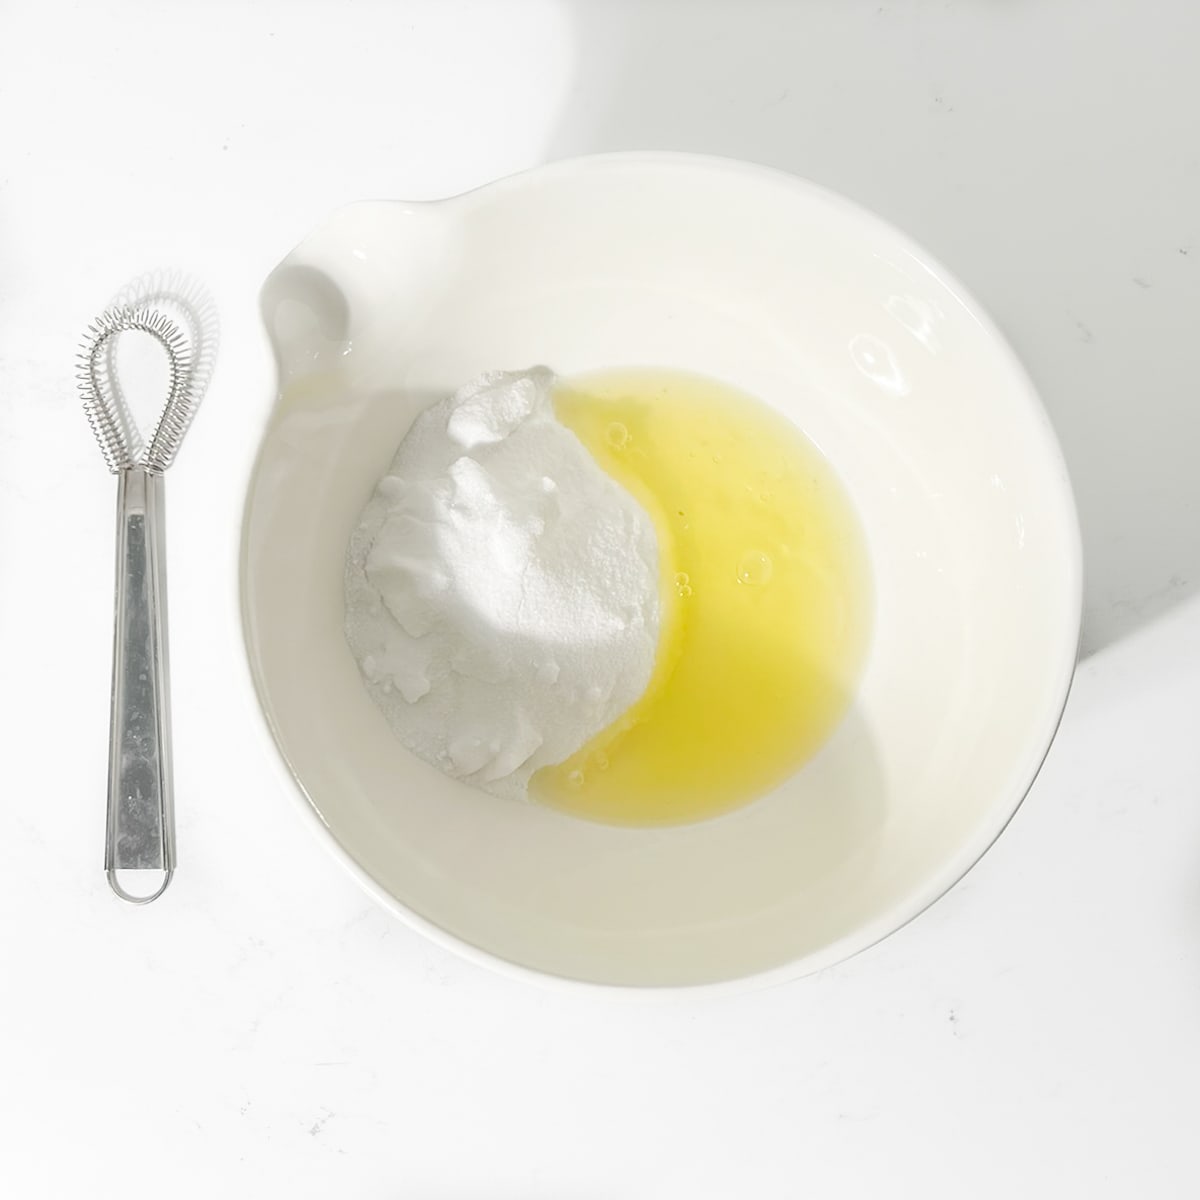 Egg whites and sugar in a white bowl.